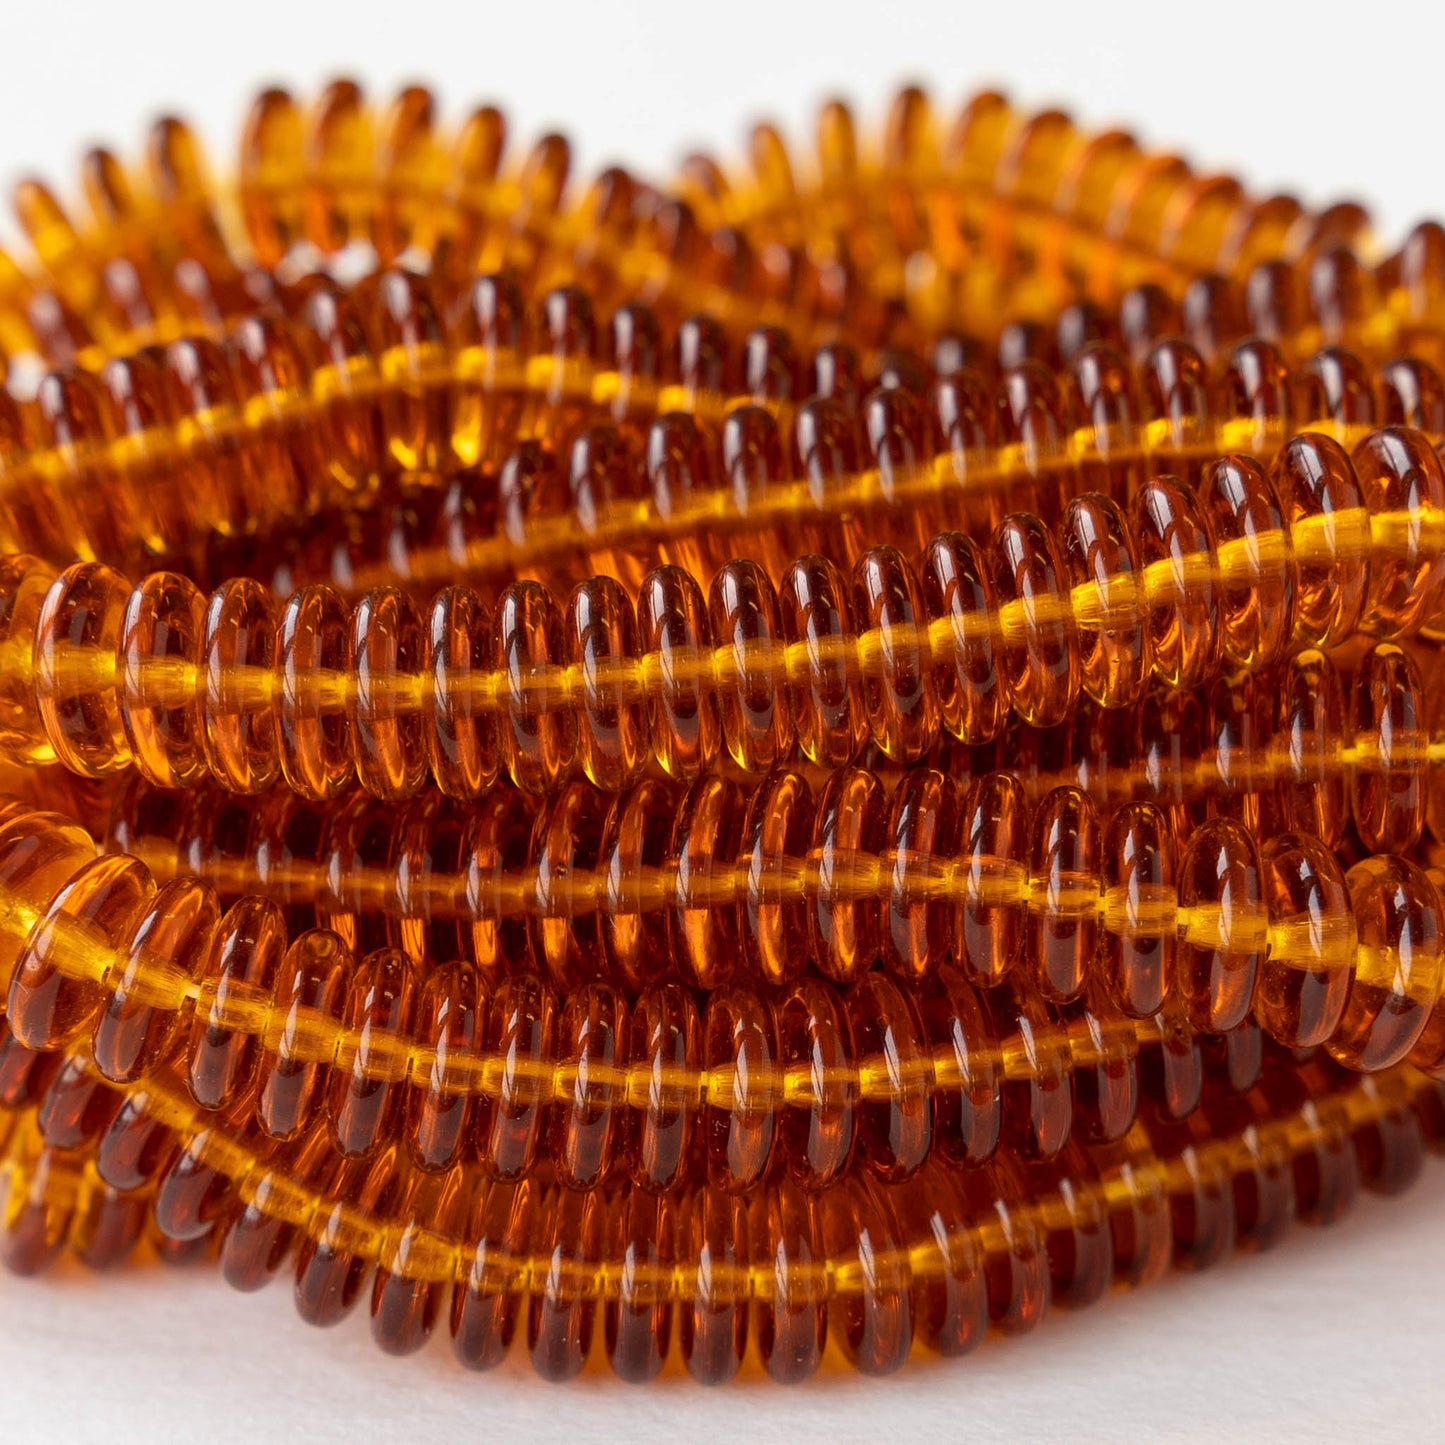 8mm Glass Rondelle Beads - Amber - 50 Beads